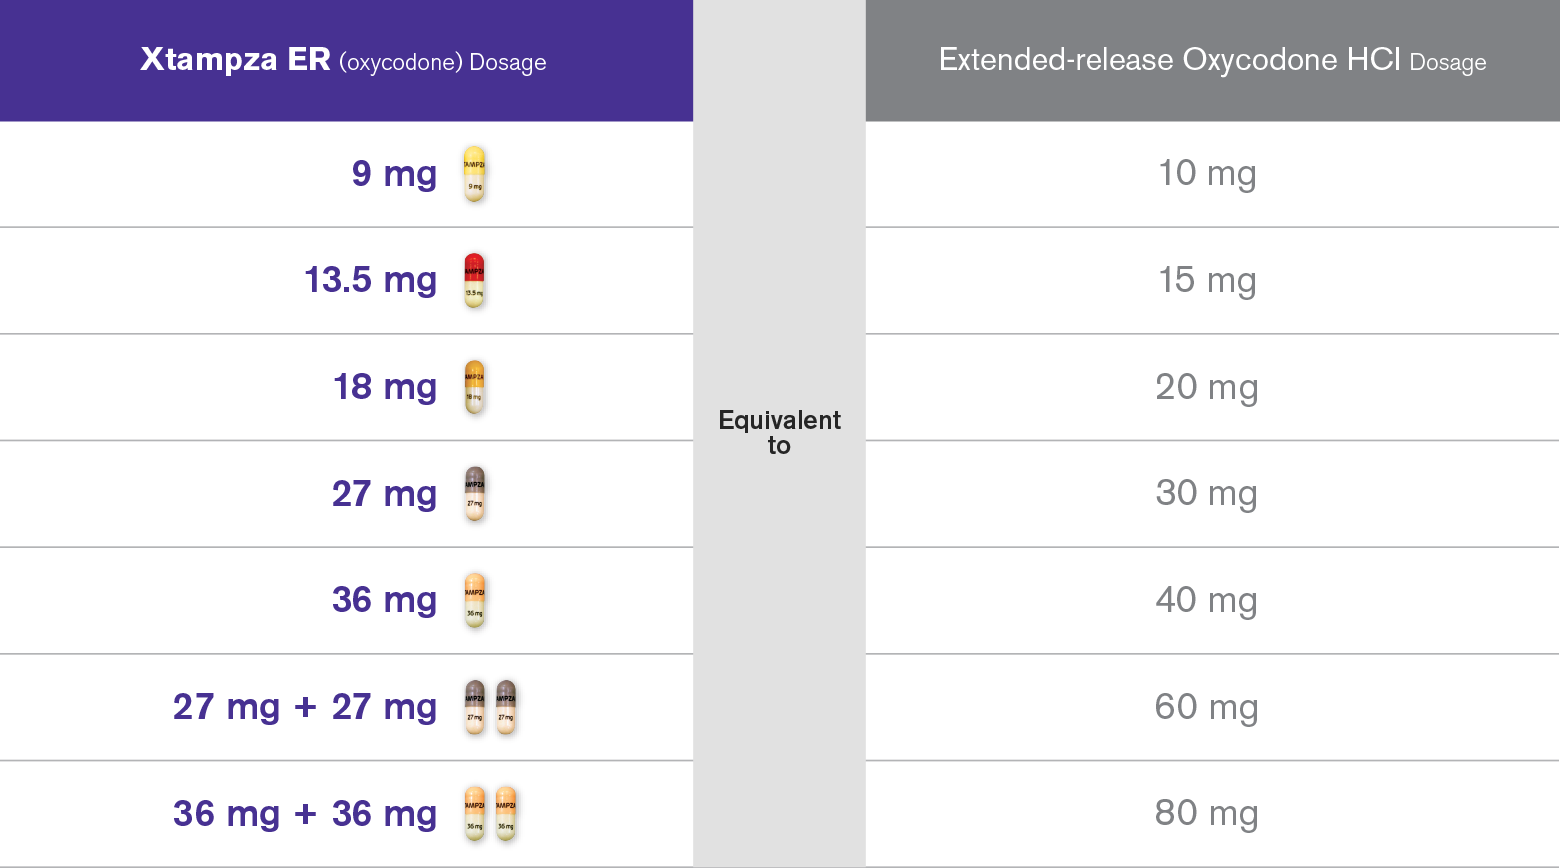 oxycodone-dosage-chart-weight-best-picture-of-chart-anyimage-org